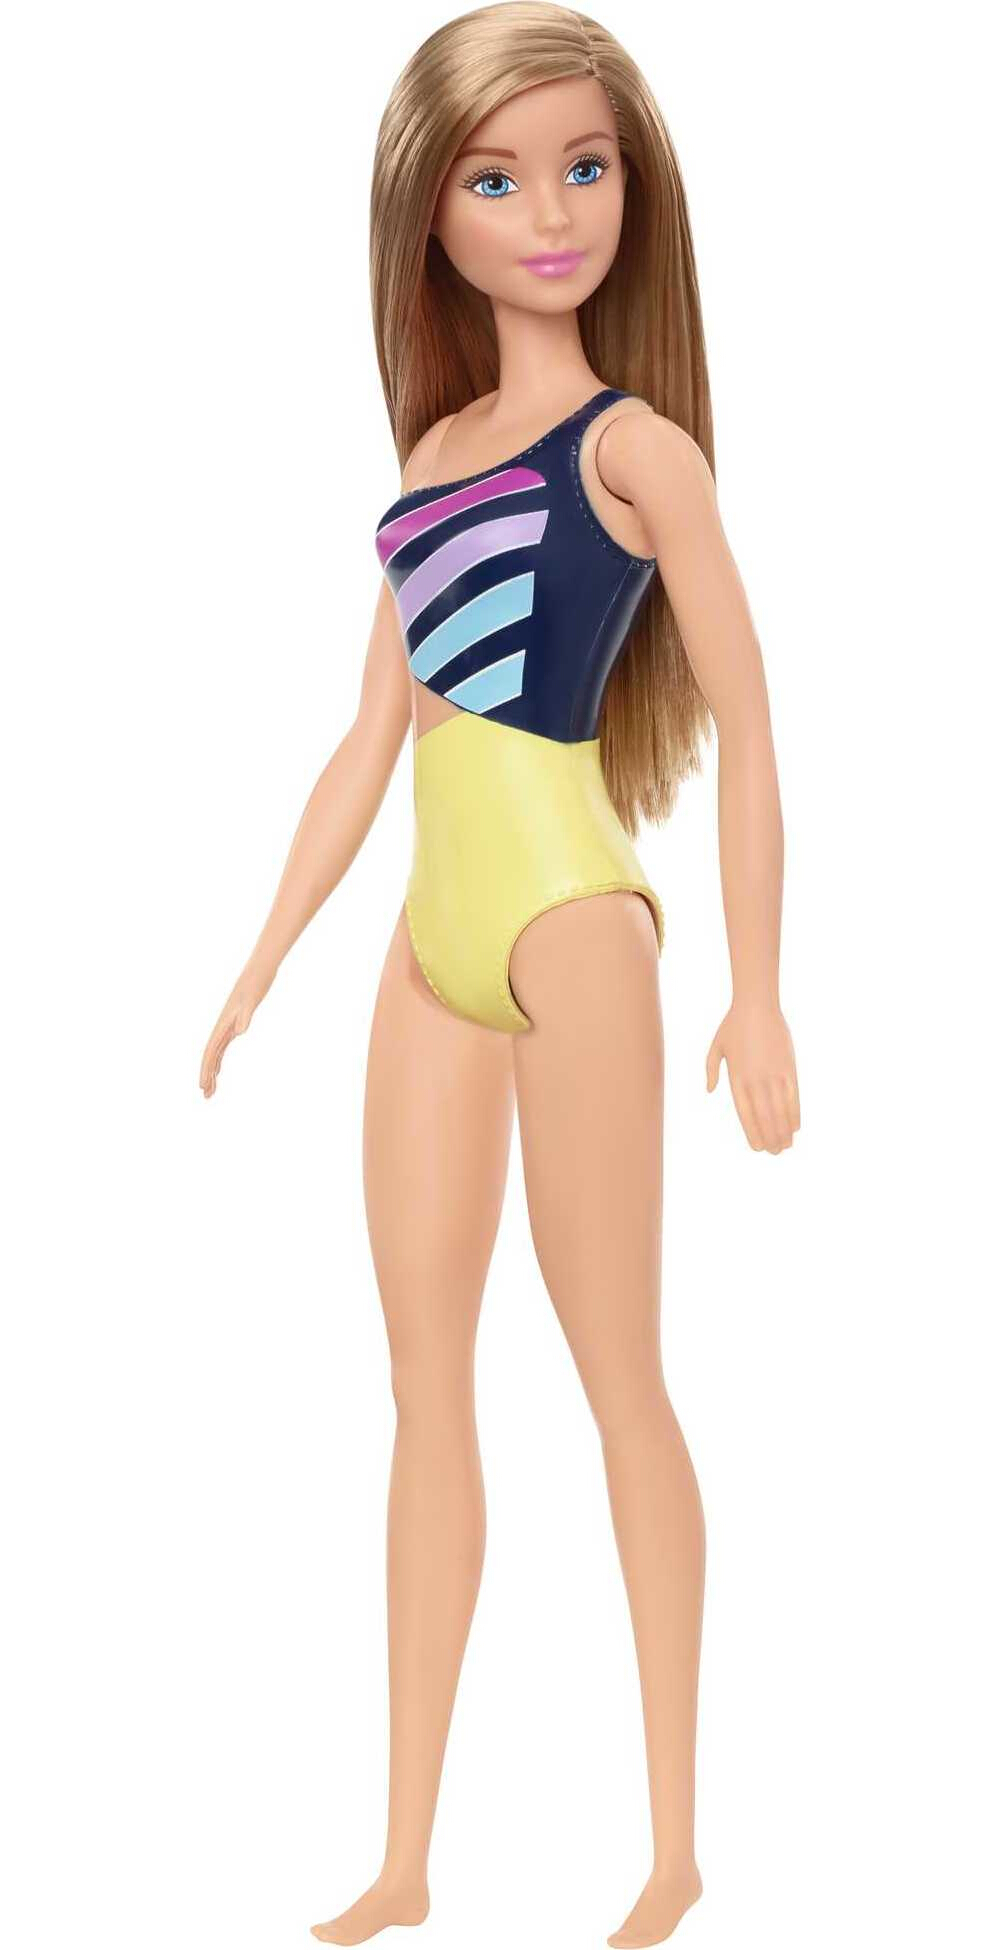 Barbie Swimsuit Beach Doll with Blonde Hair & Striped Suit - image 2 of 6